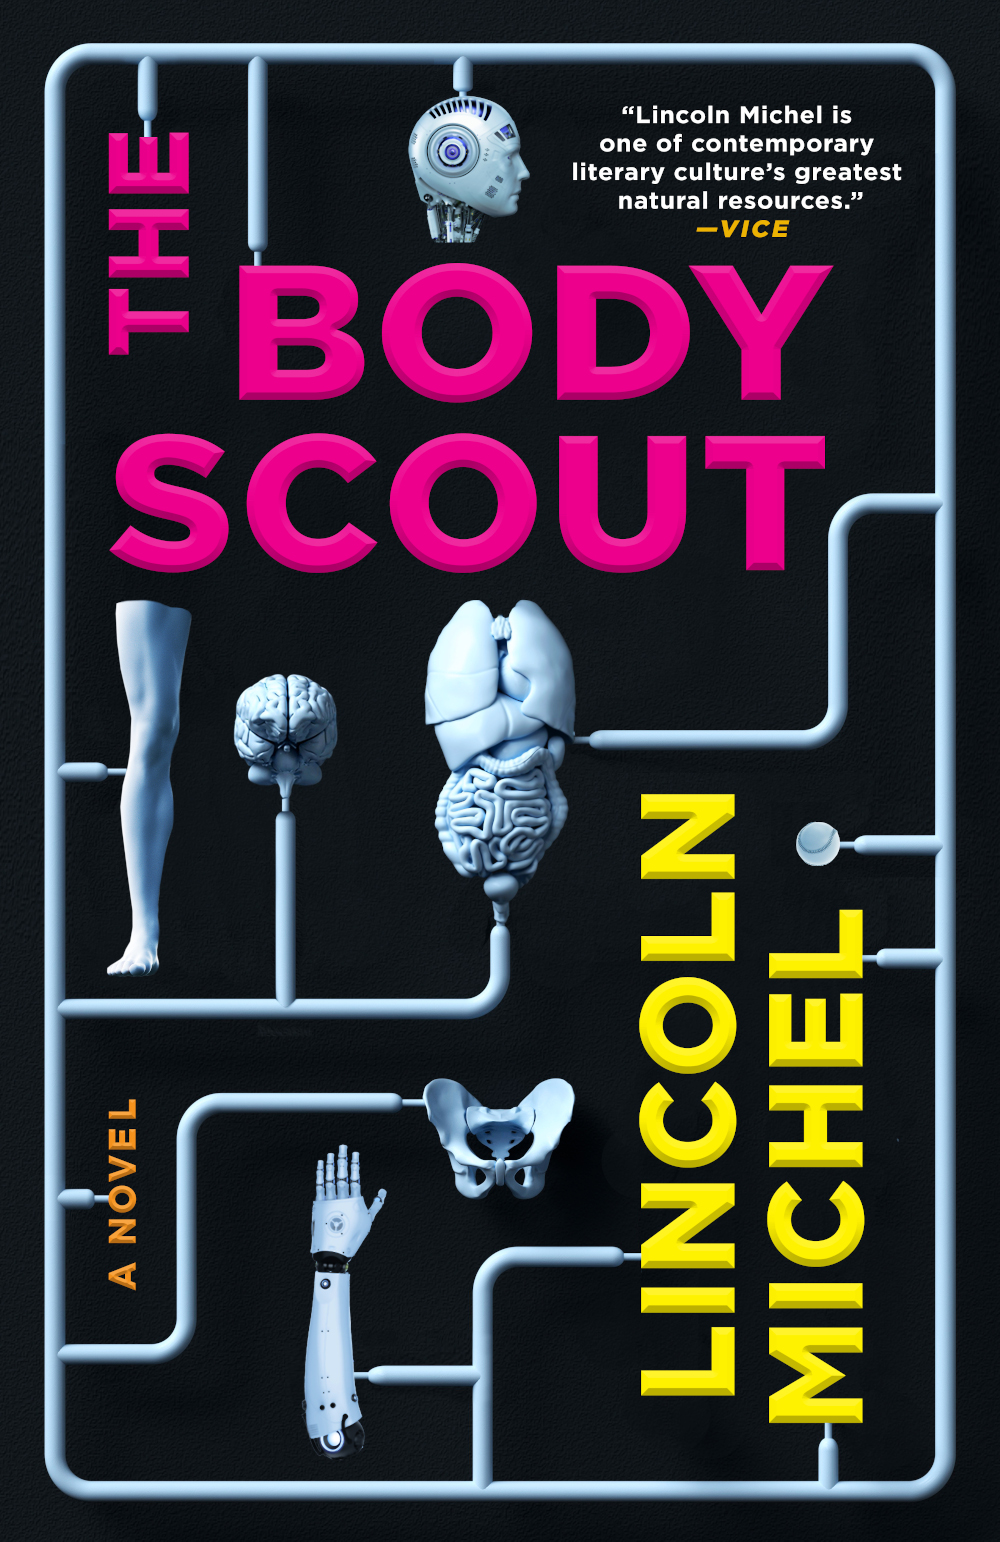 Book Launch: The Body Scout by Lincoln Michel in conversation with Isaac Fitzgerald